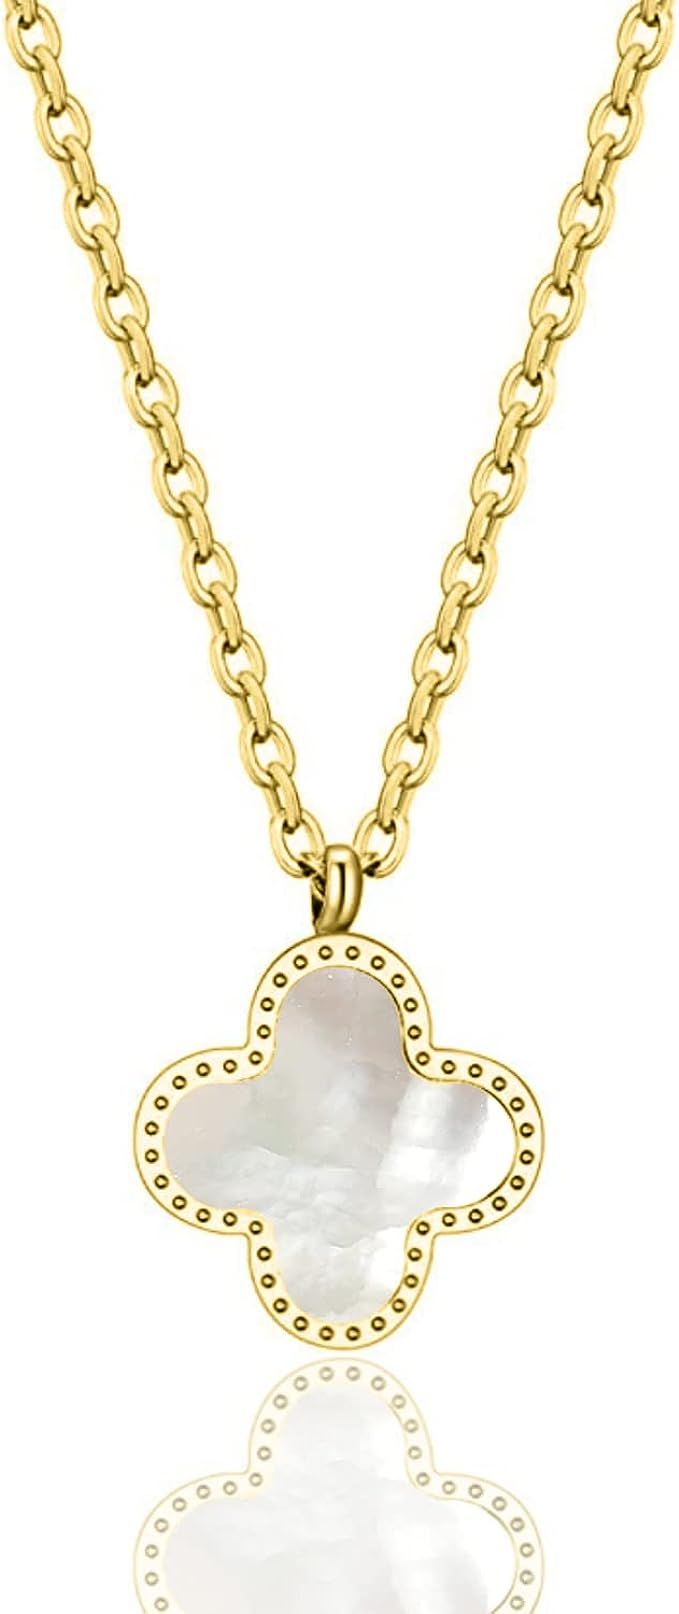 HighSpark Clover Necklaces for Women | Four Leaf Clover Necklace Pendant | Lovely Gift - White | Amazon (US)